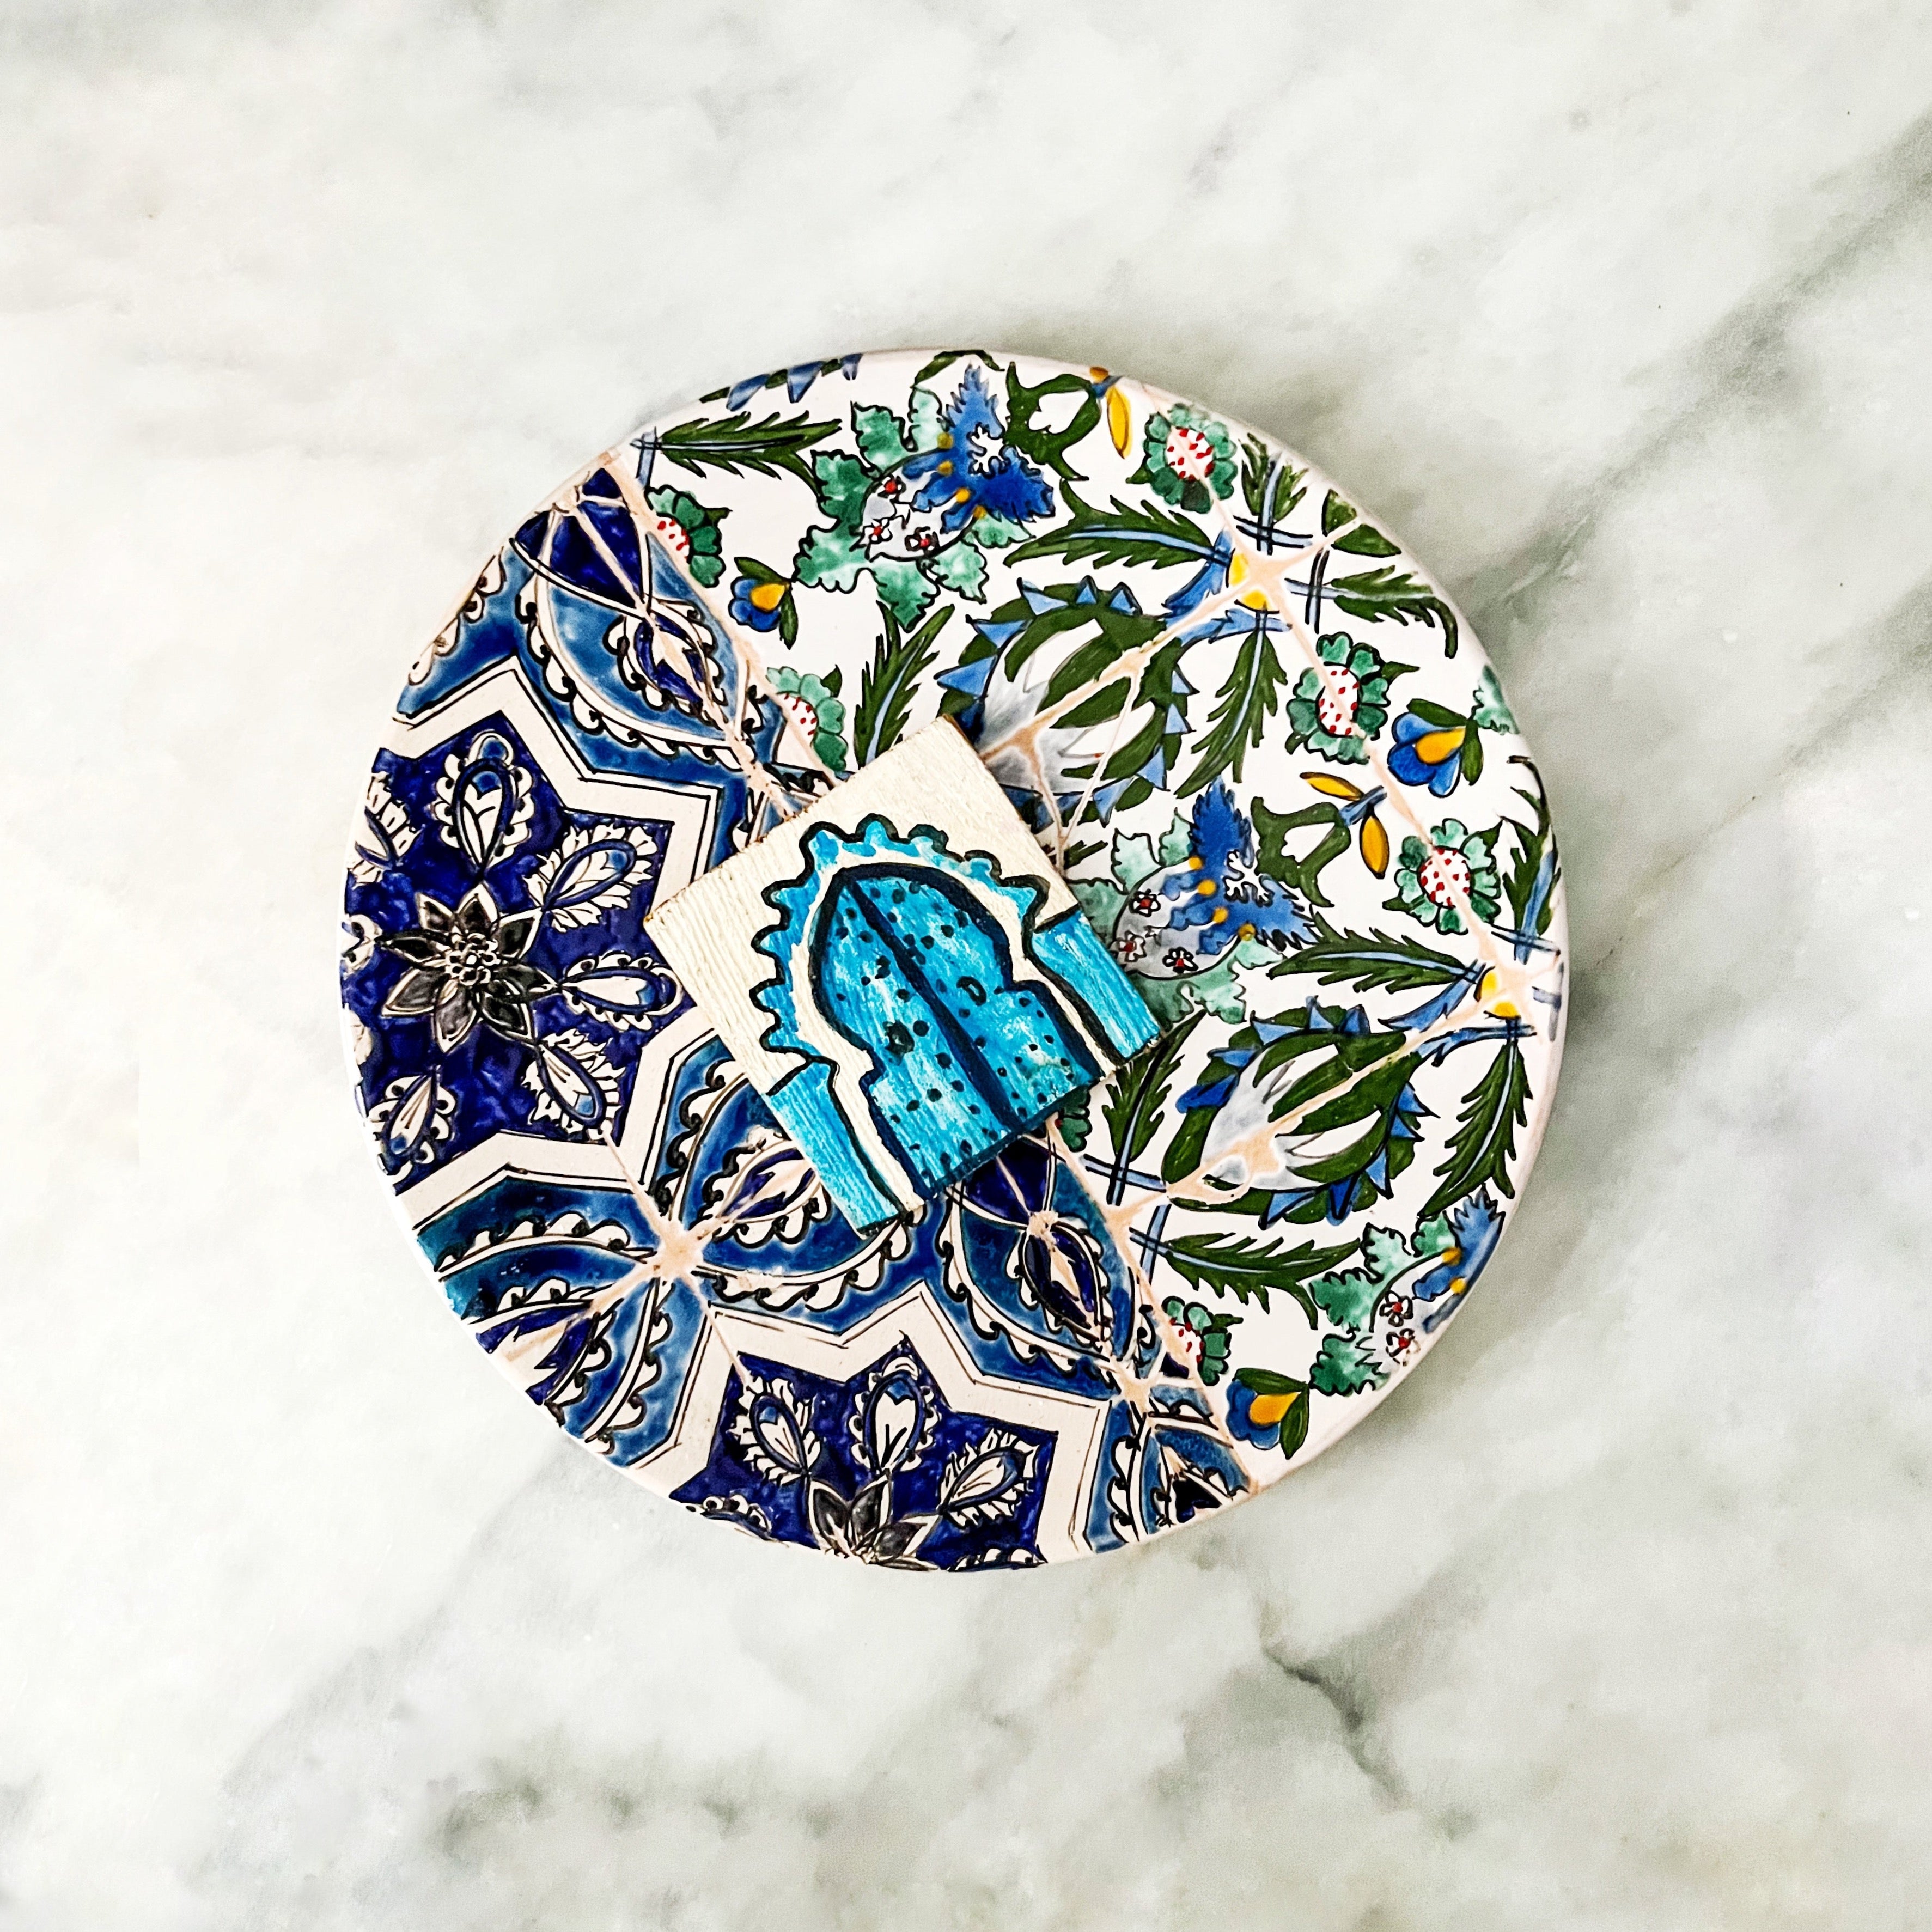 hand painted floral ceramic plate made in Tunisia